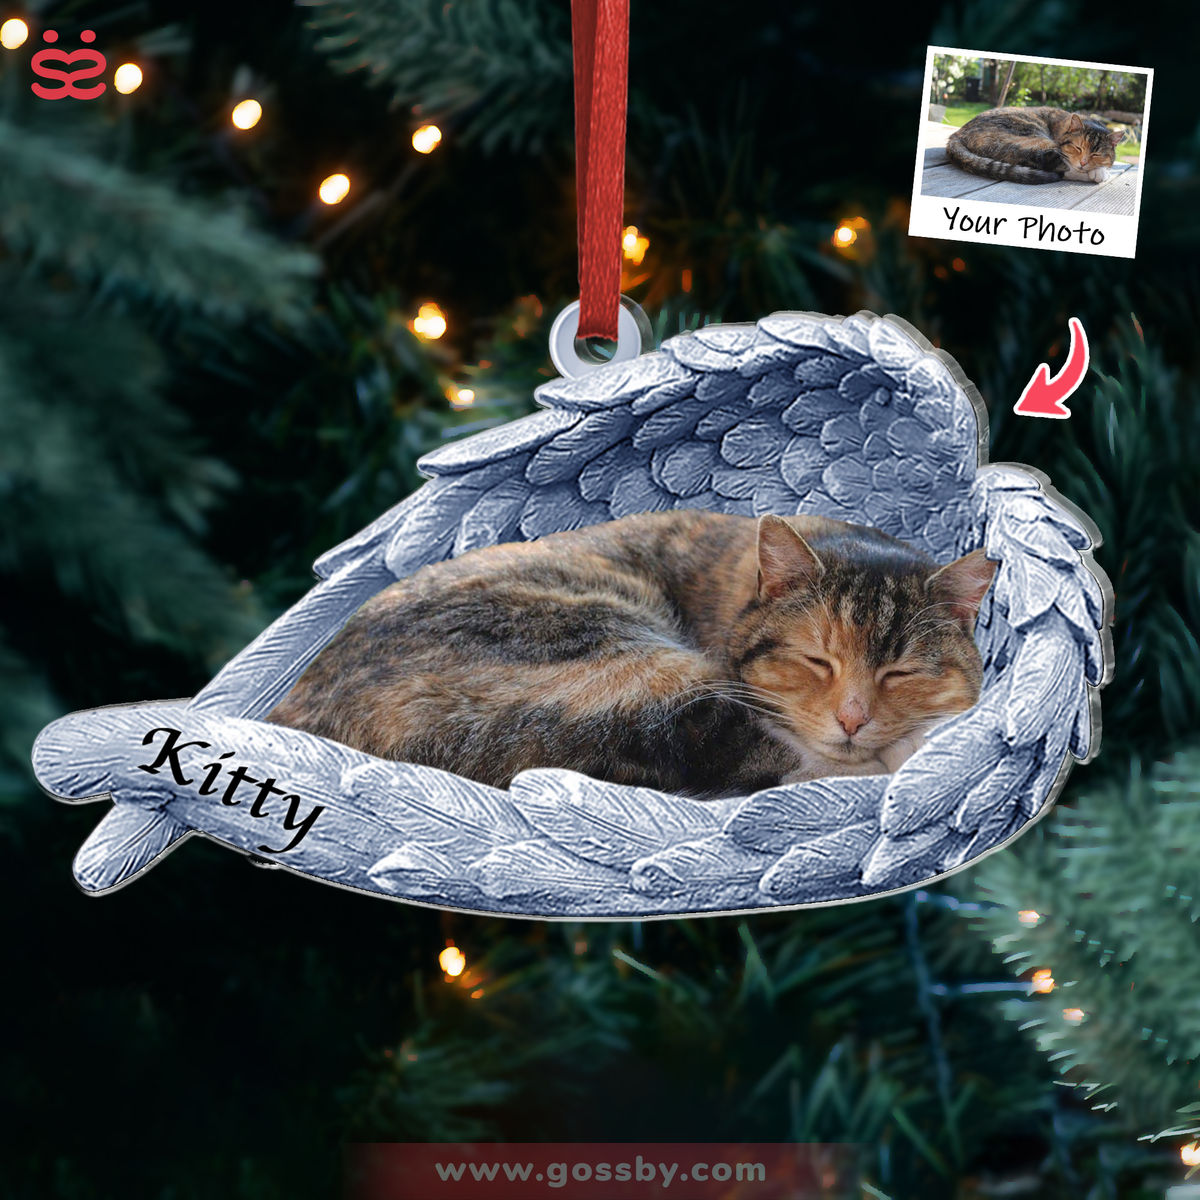 Dog Acrylic Ornament - Dog Lover Gifts - Sleeping Pet Within Angel Wings - Custom Ornament from Photo - 2D Acrylic Ornament_2